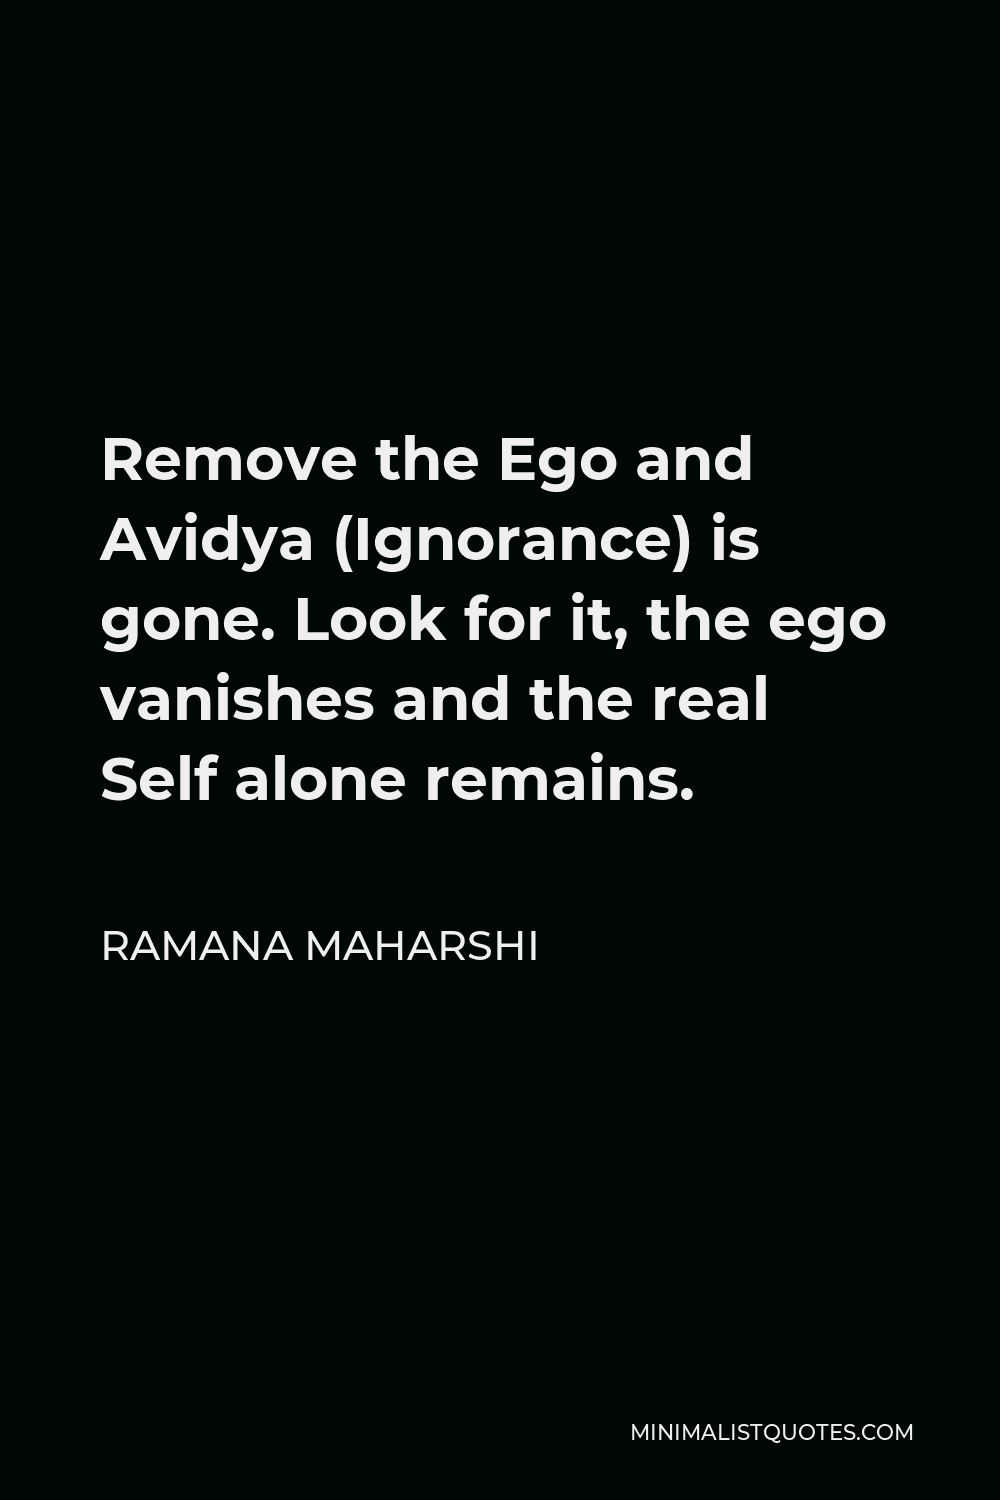 Ramana Maharshi Quote - Remove the Ego and Avidya (Ignorance) is gone. Look for it, the ego vanishes and the real Self alone remains.